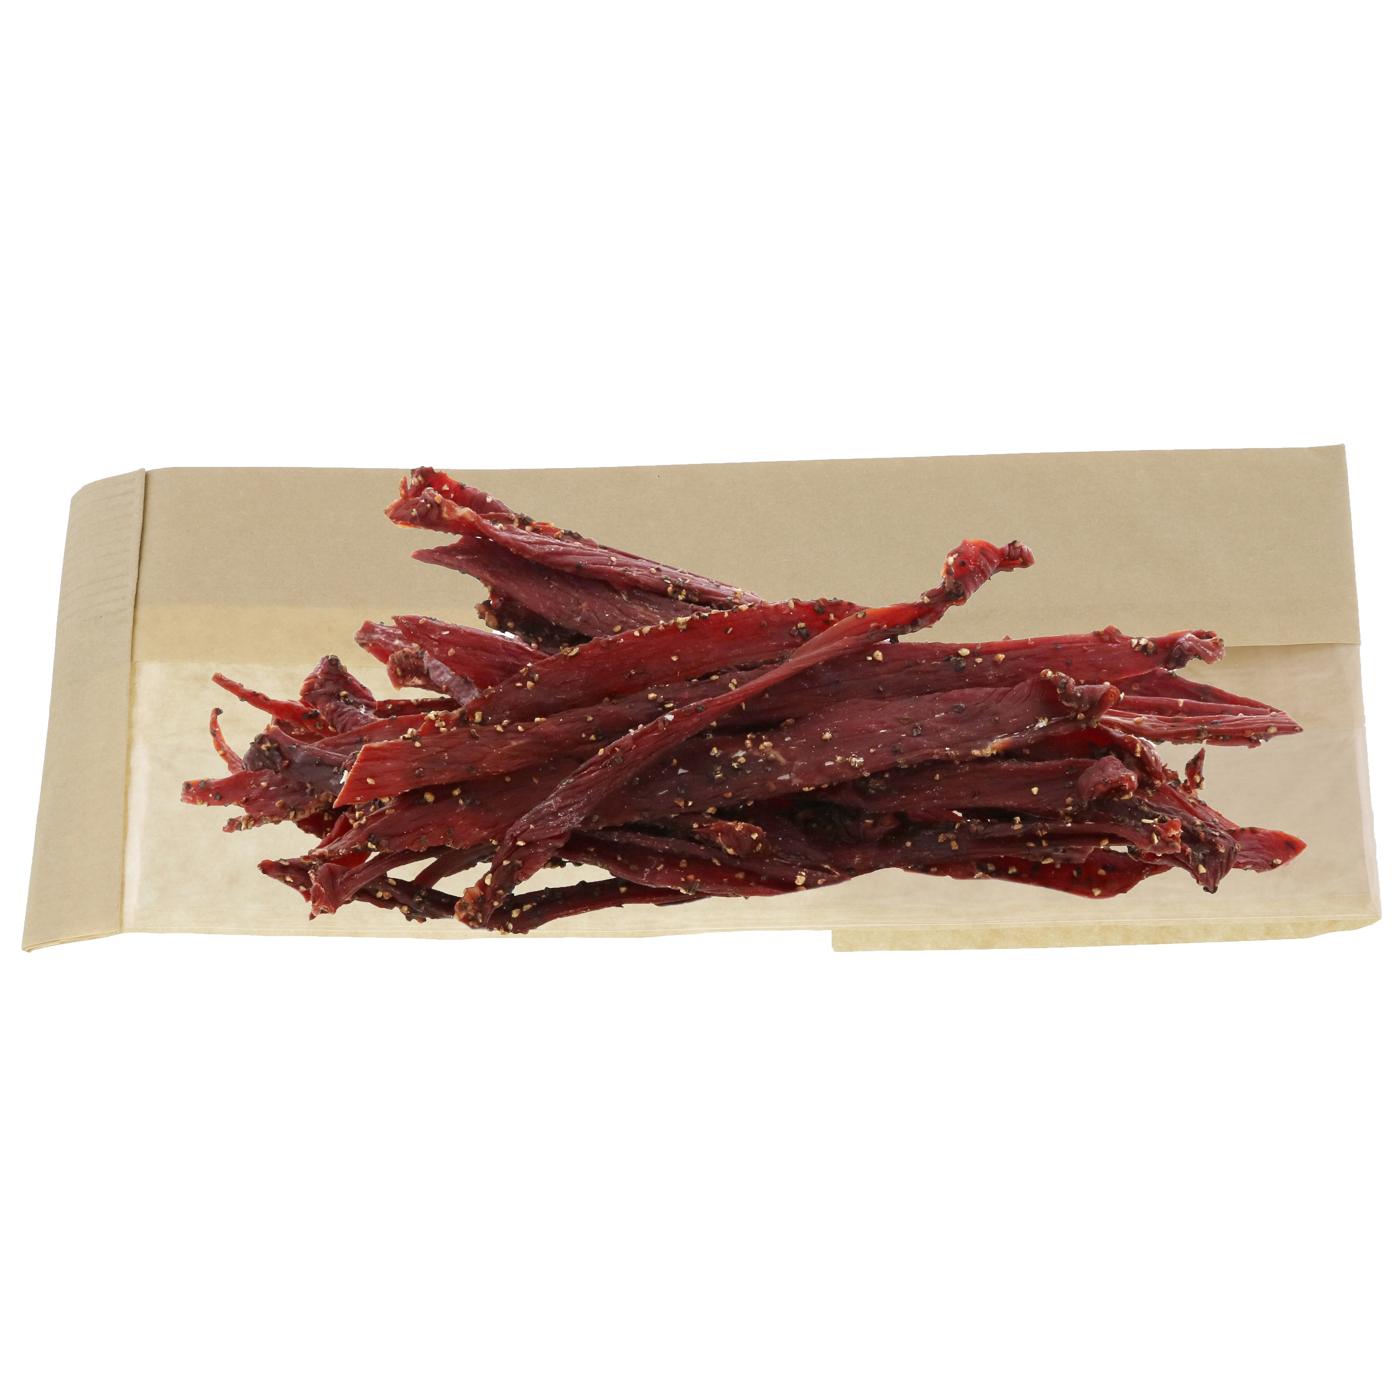 Prasek's Peppered Beef Jerky Thin Cut; image 2 of 2